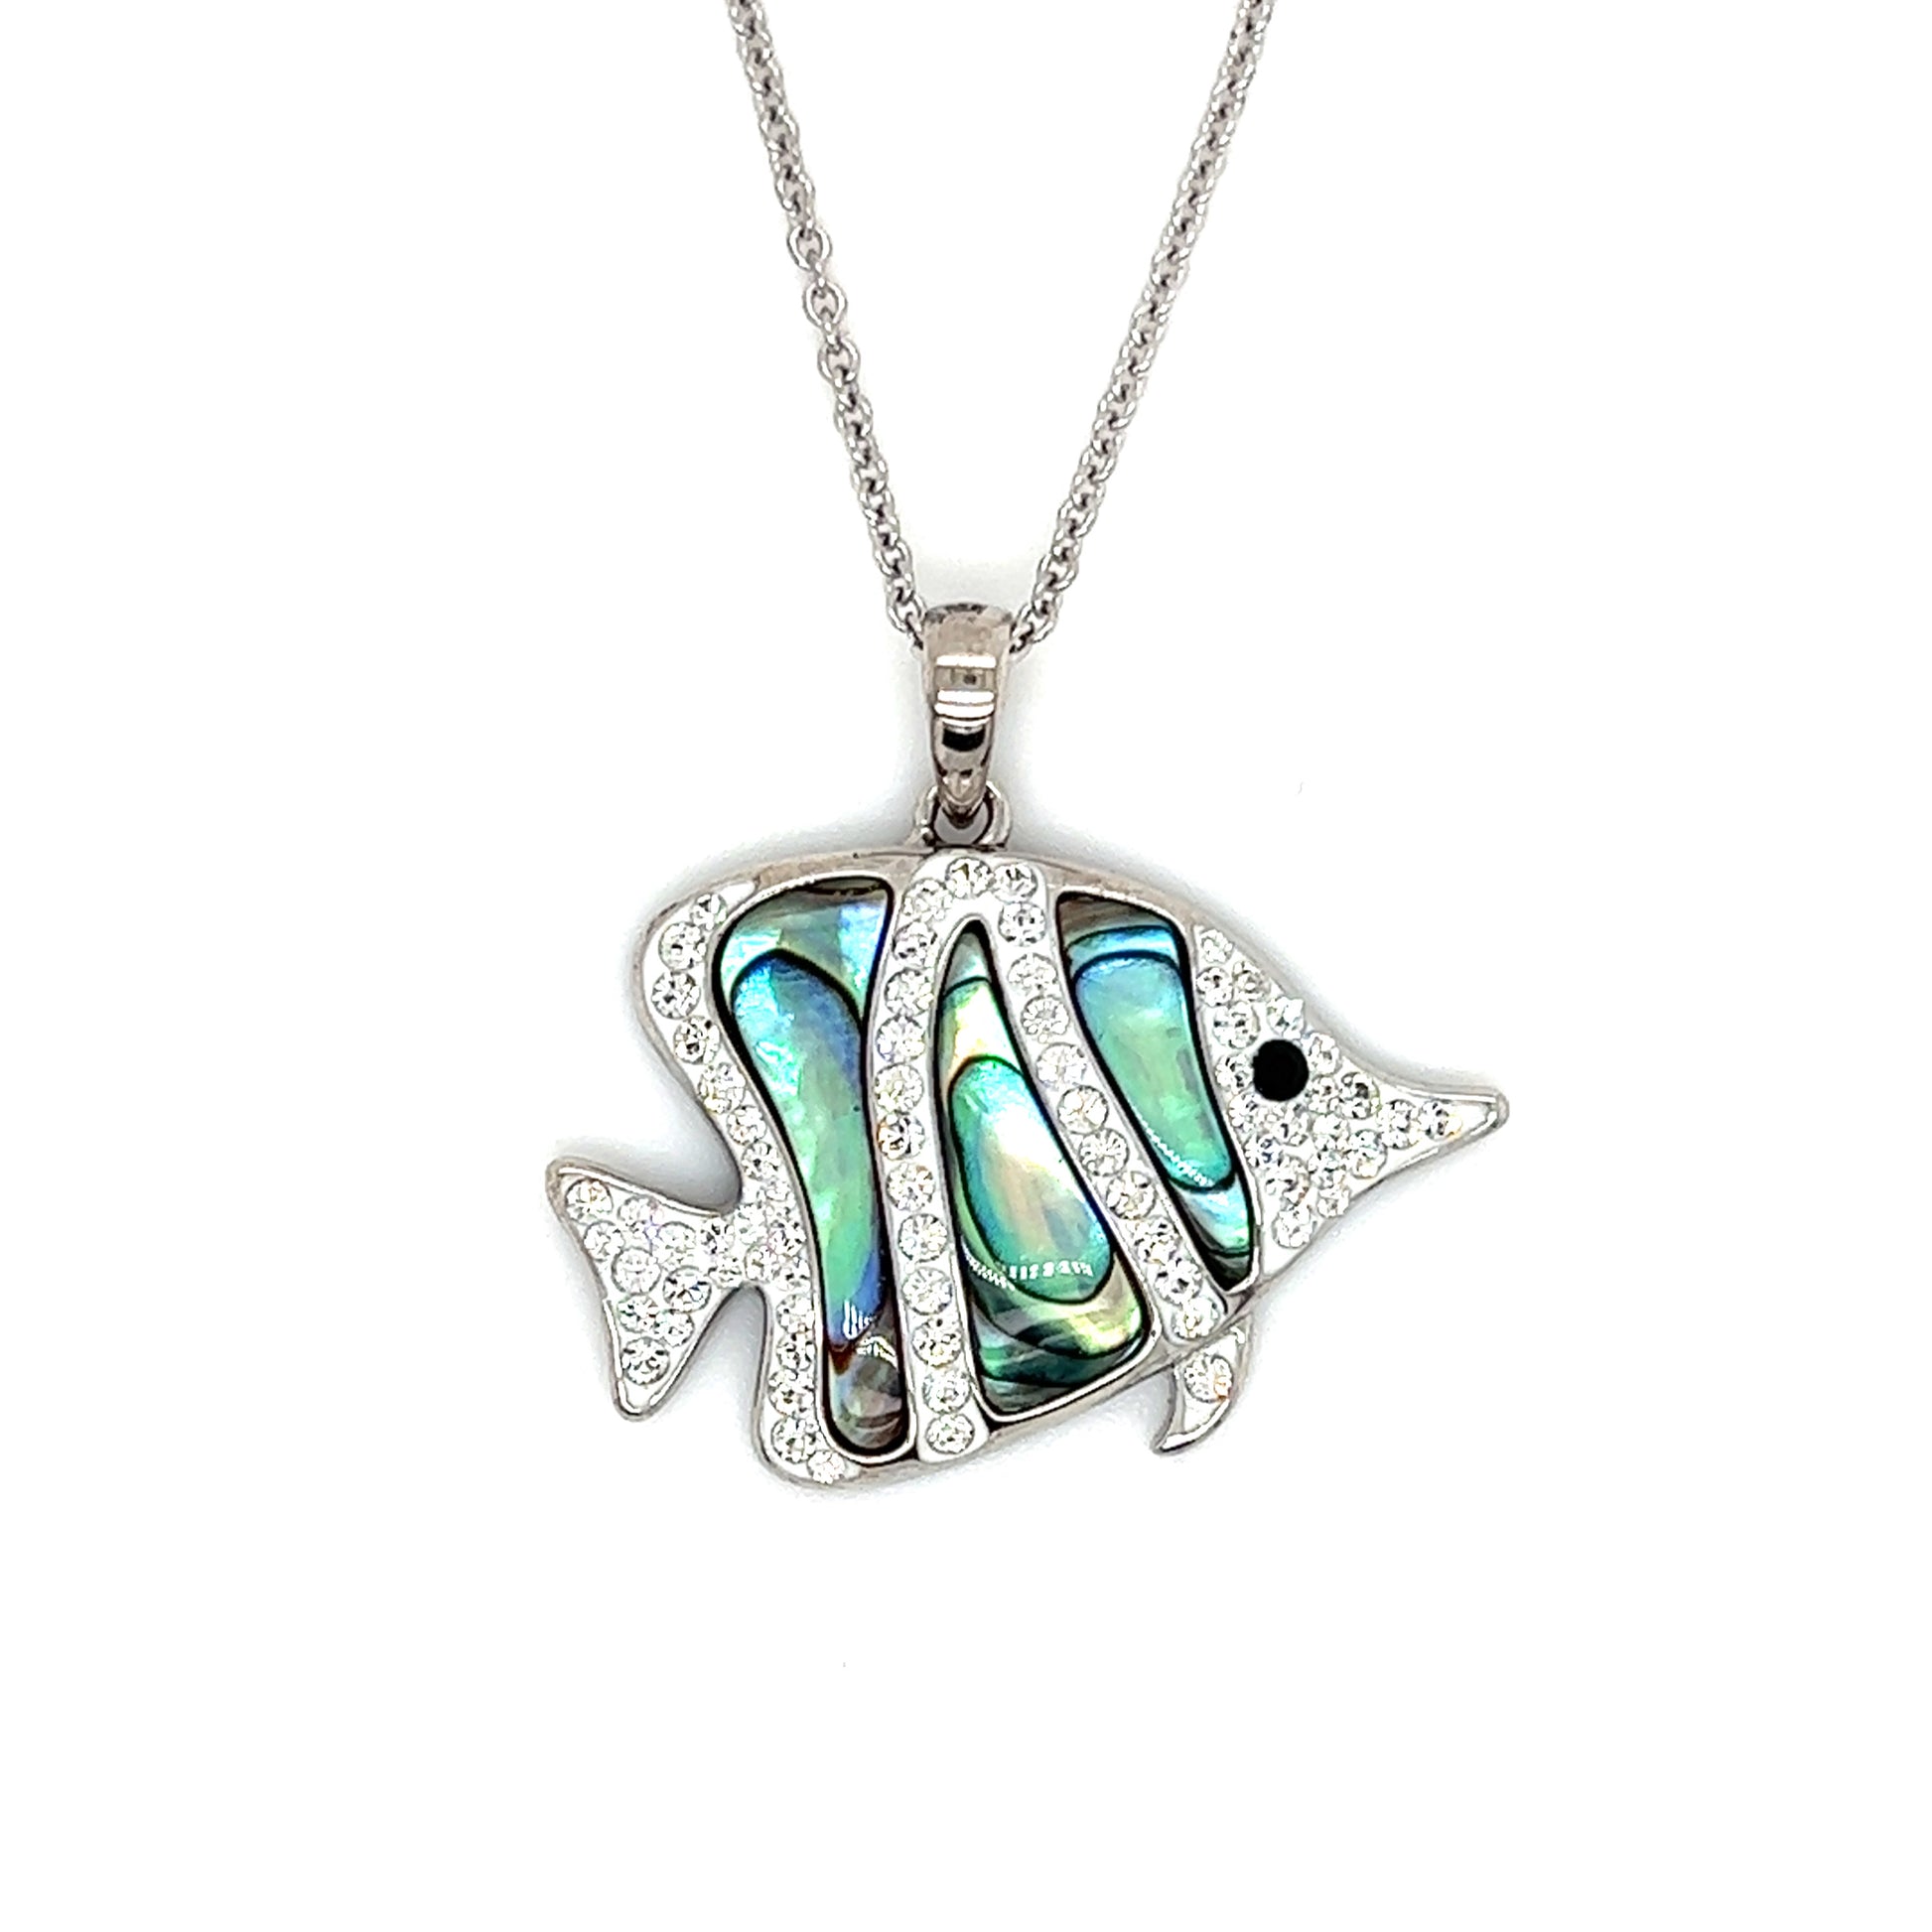 Hippo Tang Fish Necklace with Abalone Shell and White Crystals in Sterling Silver Front